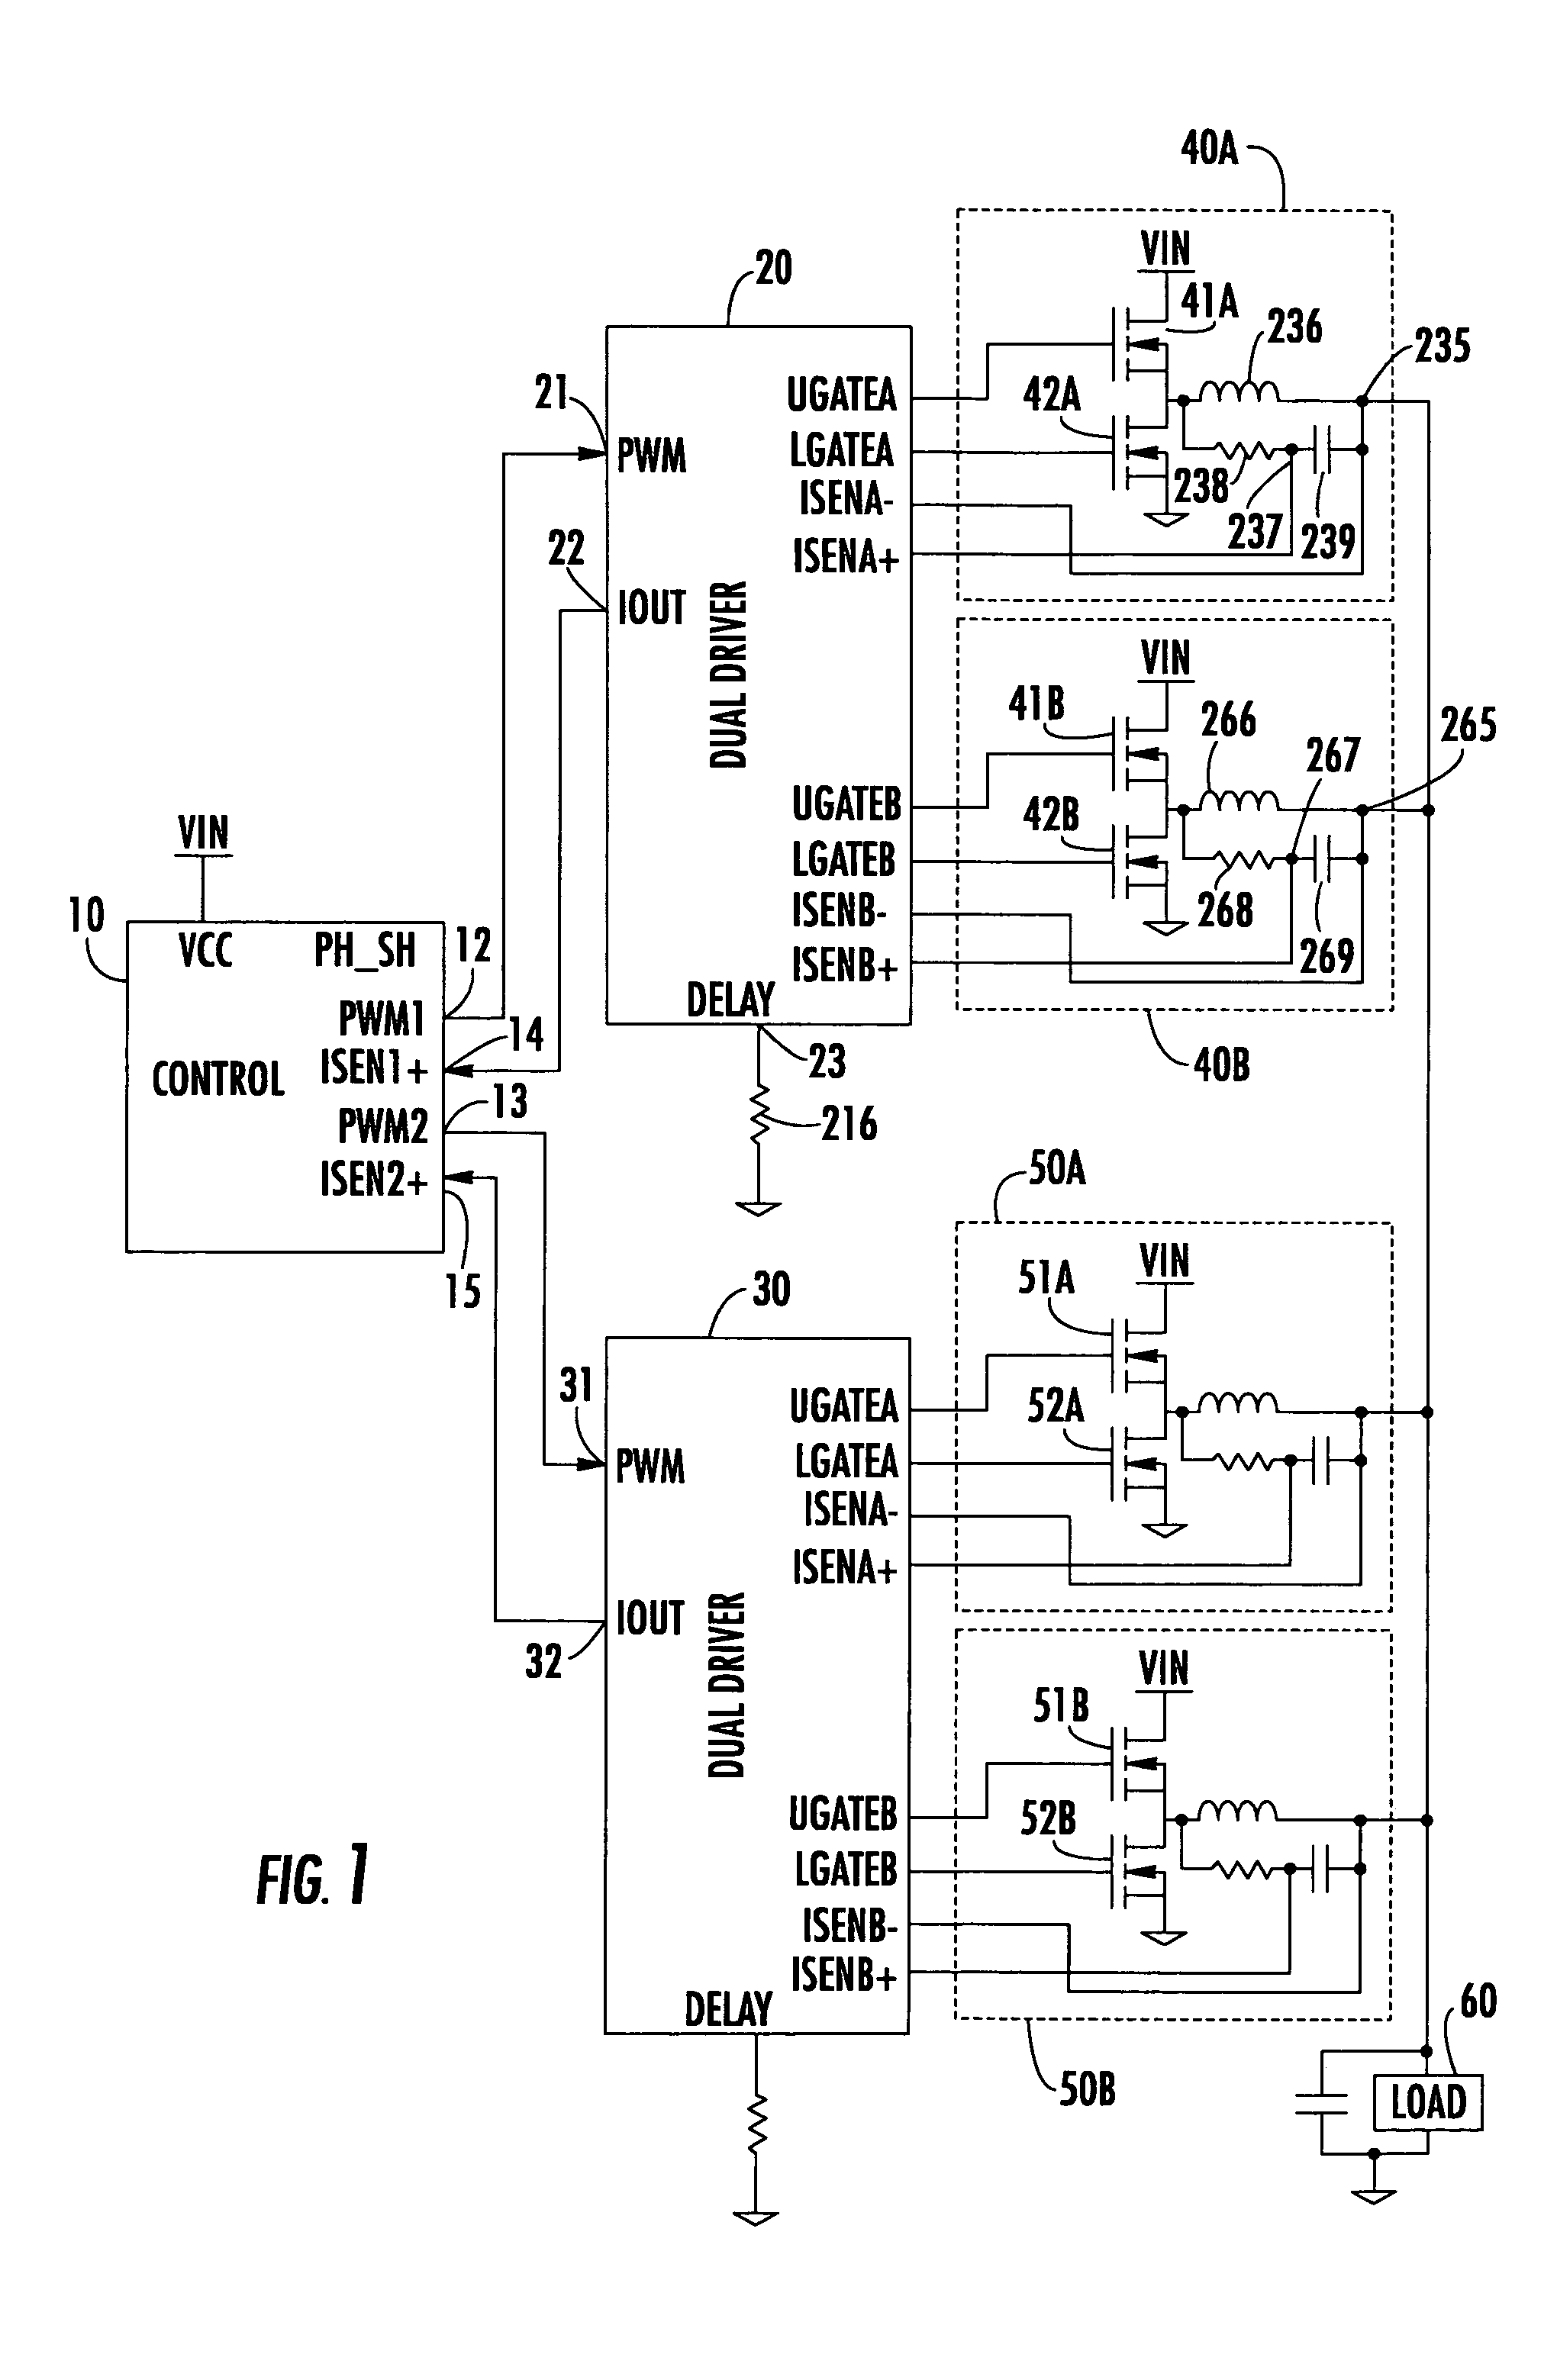 Multi-channel driver interface circuit for increasing phase count in a multi-phase DC-DC converter